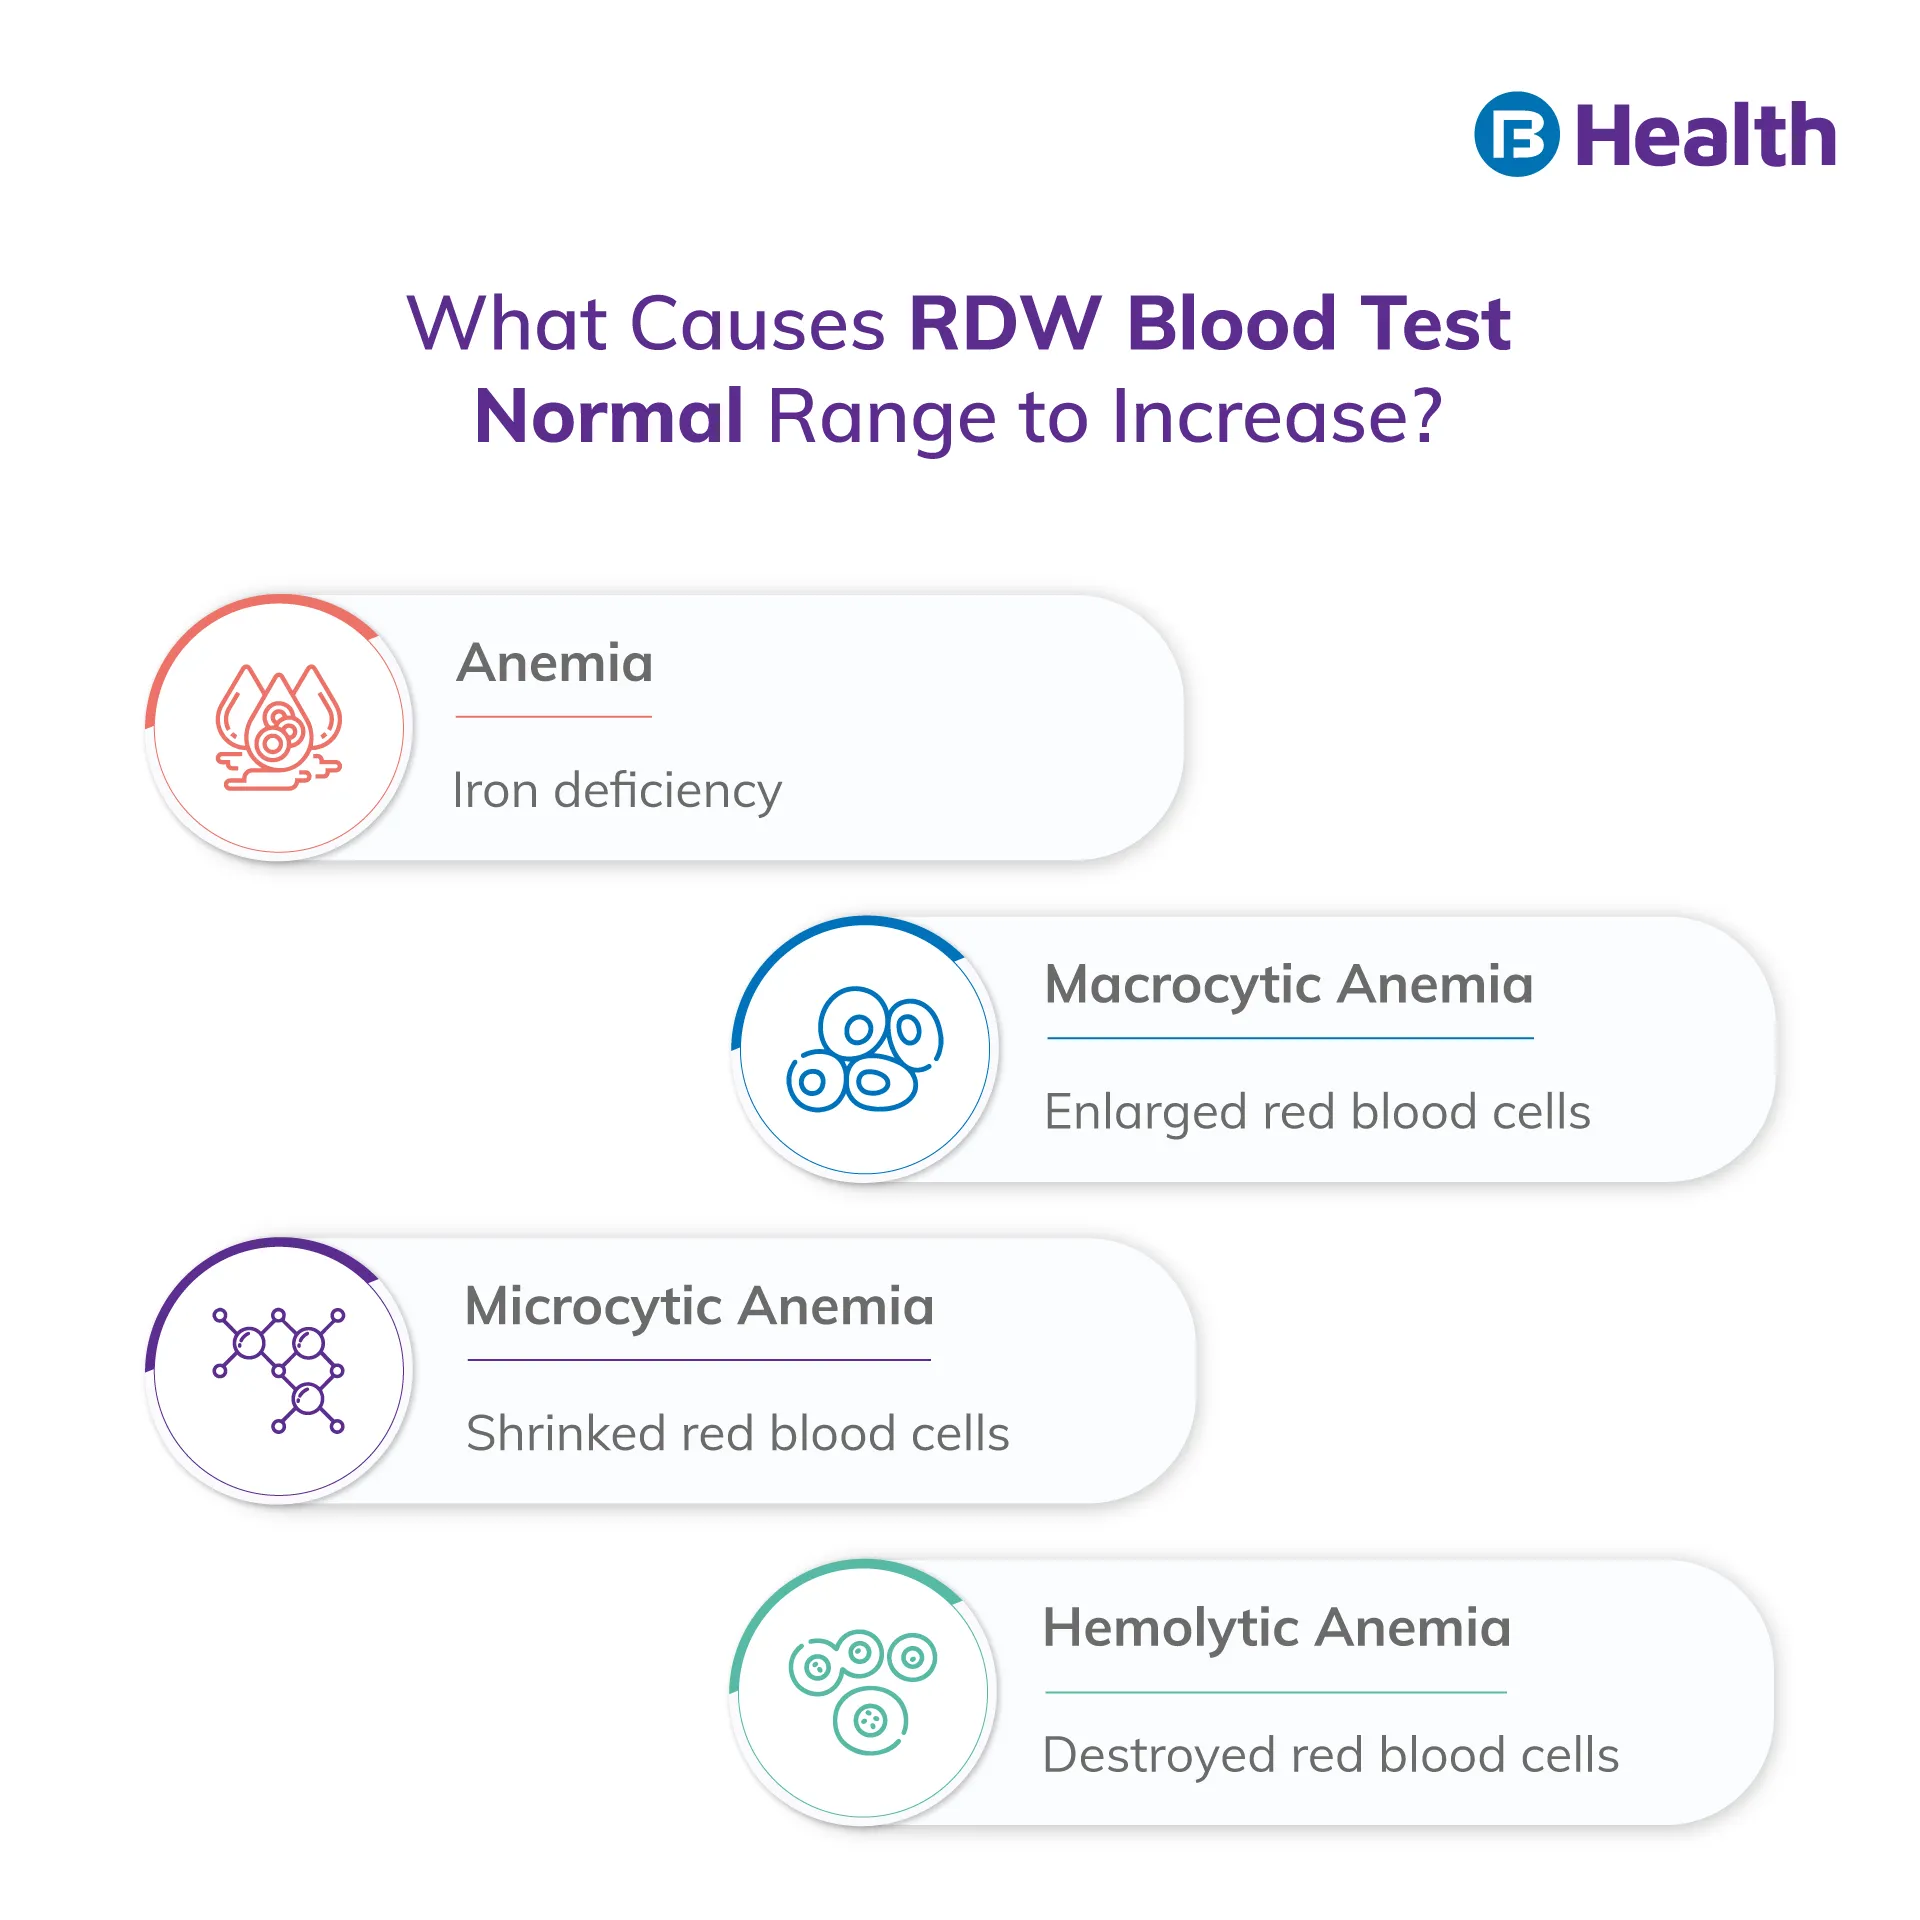 what causes RDW Blood Test Normal Range increase